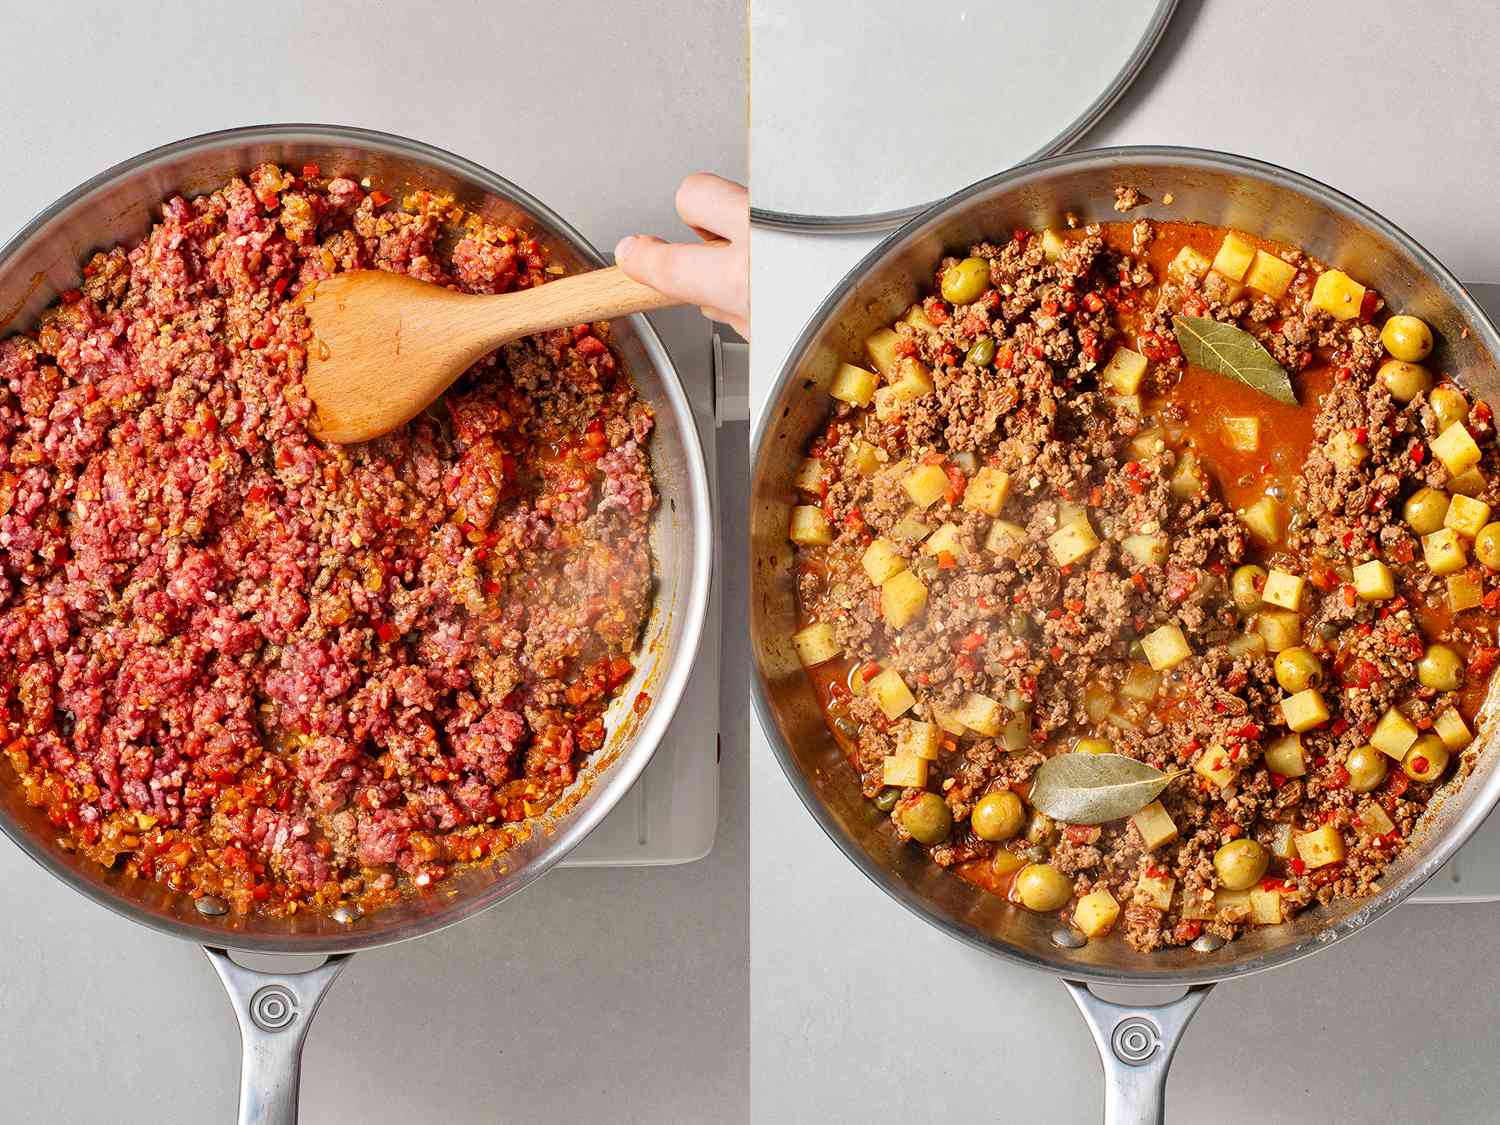 A two-image collage showing meet and potatoes being added to the pan of cooked ingredients.